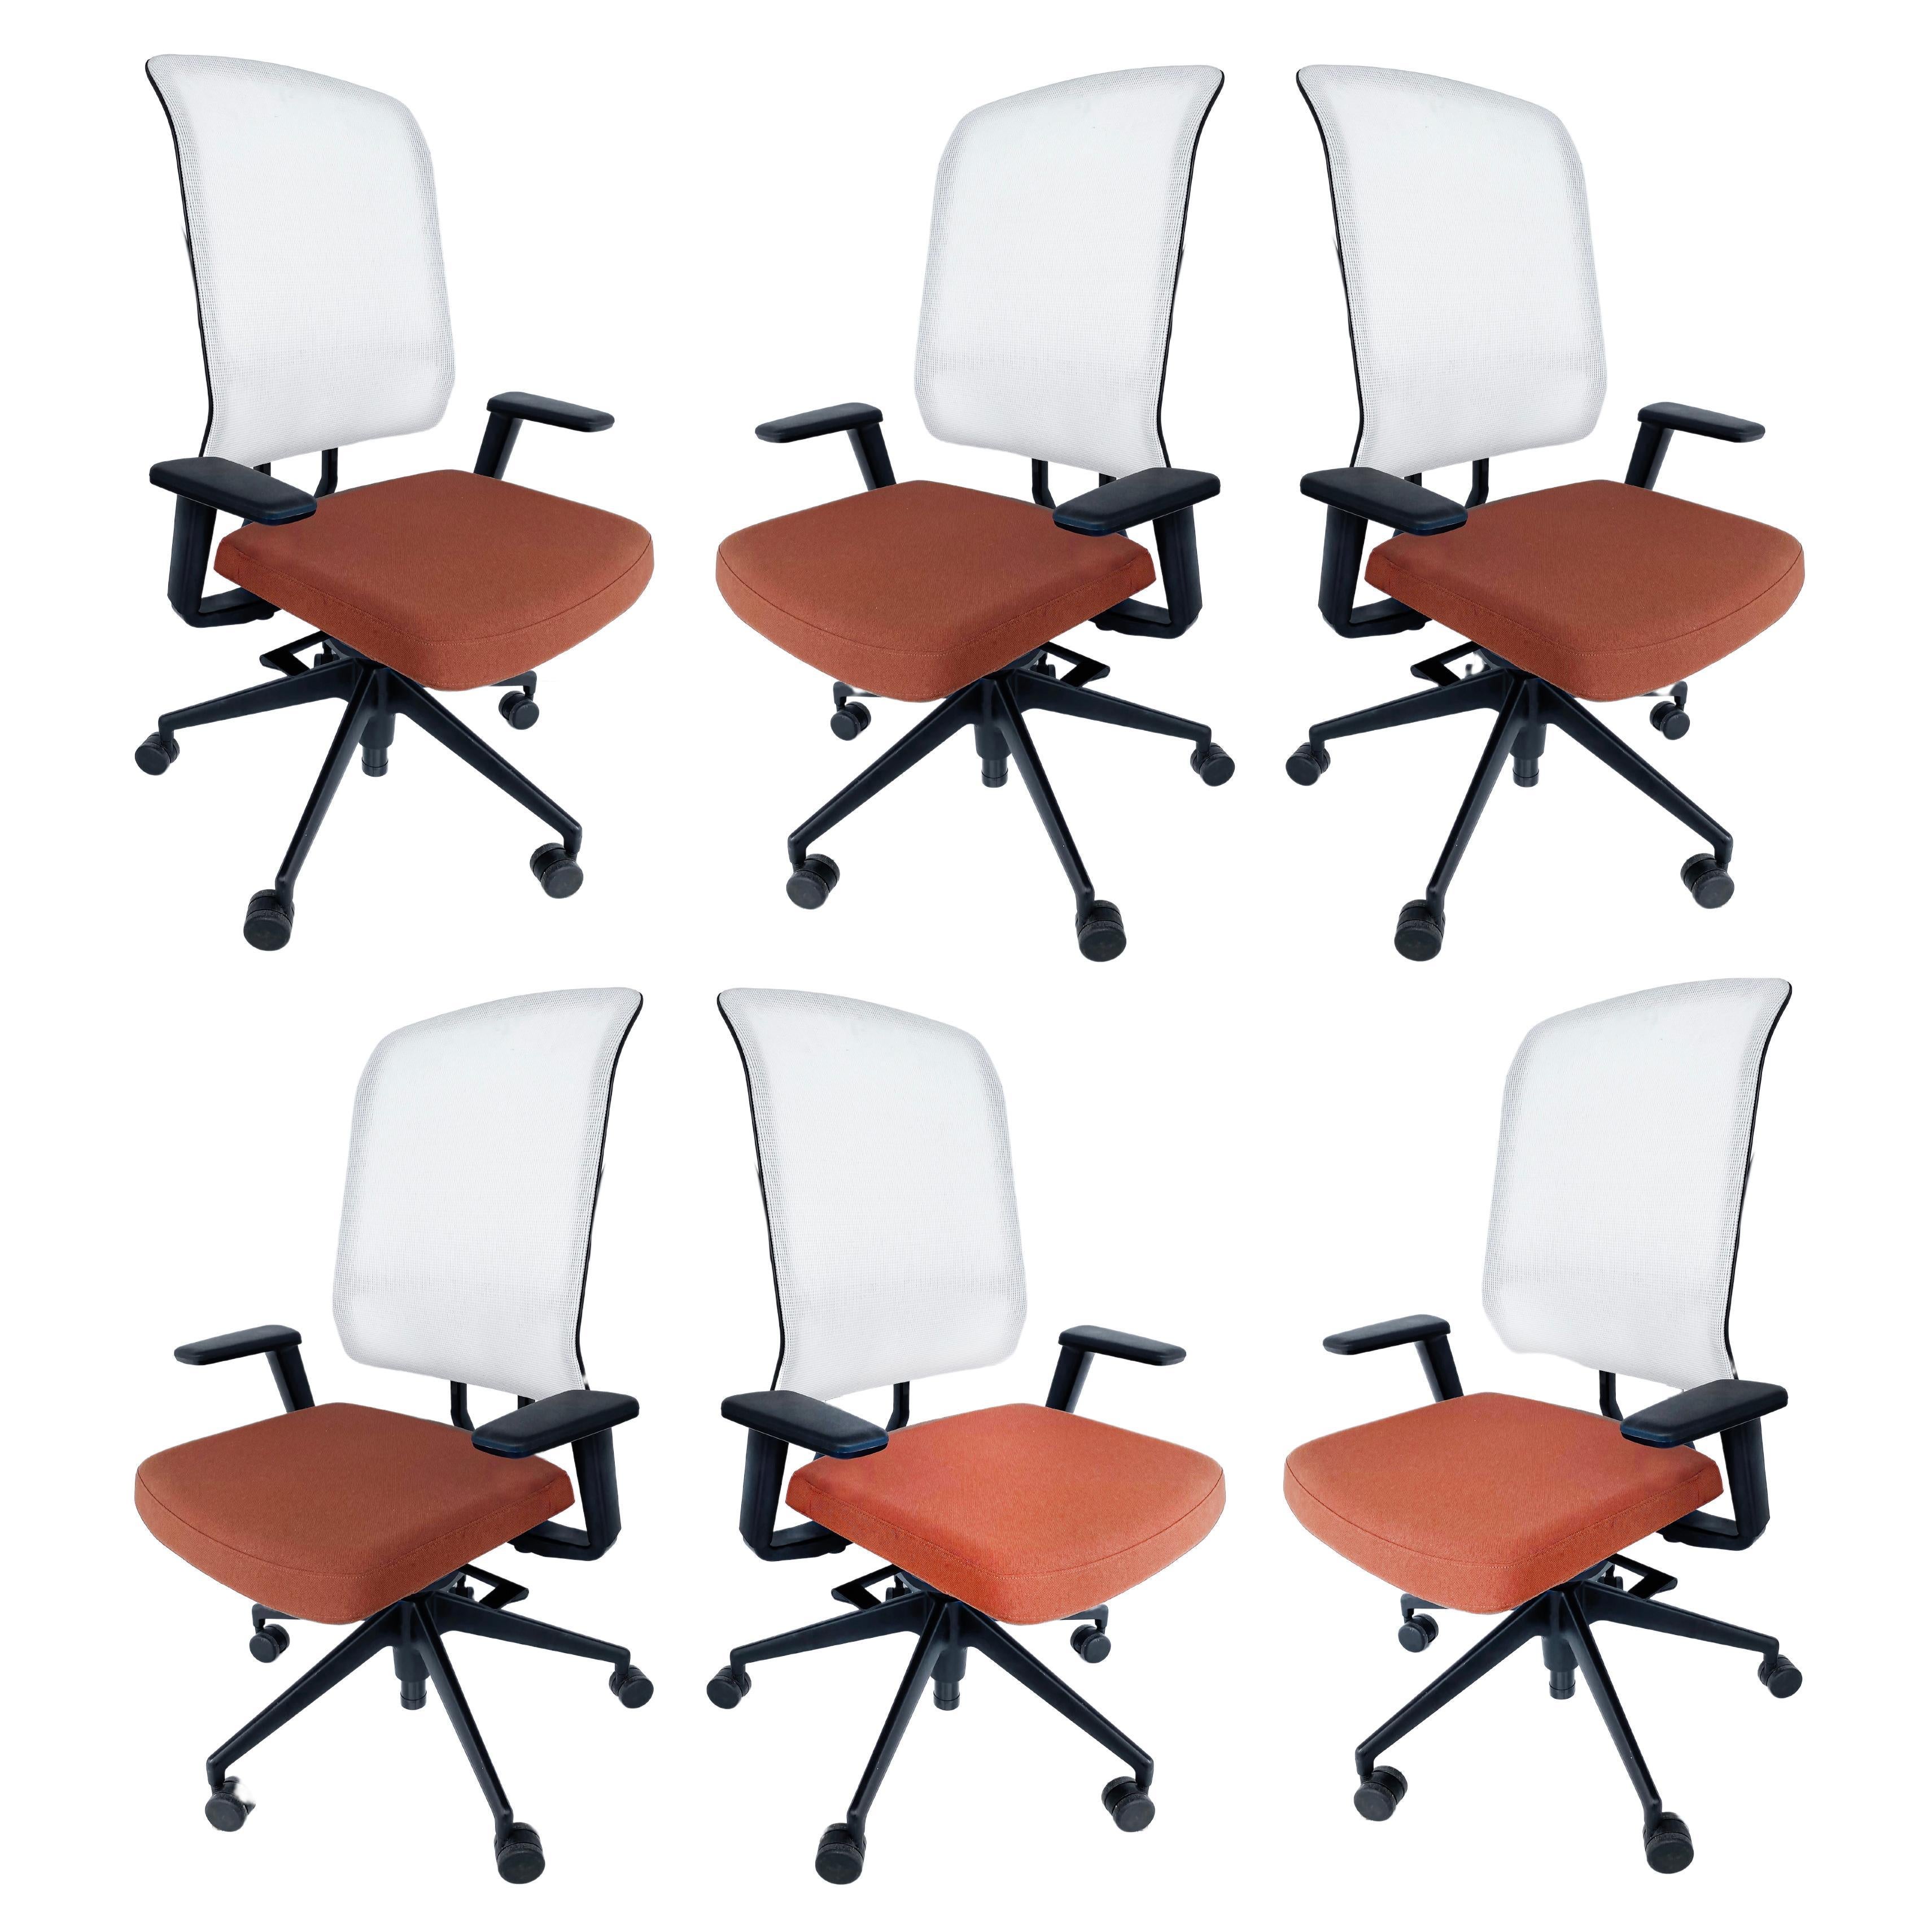 Vitra AM Fully Adjustable Ergonomic Office Chairs by Alberto Meda 2021